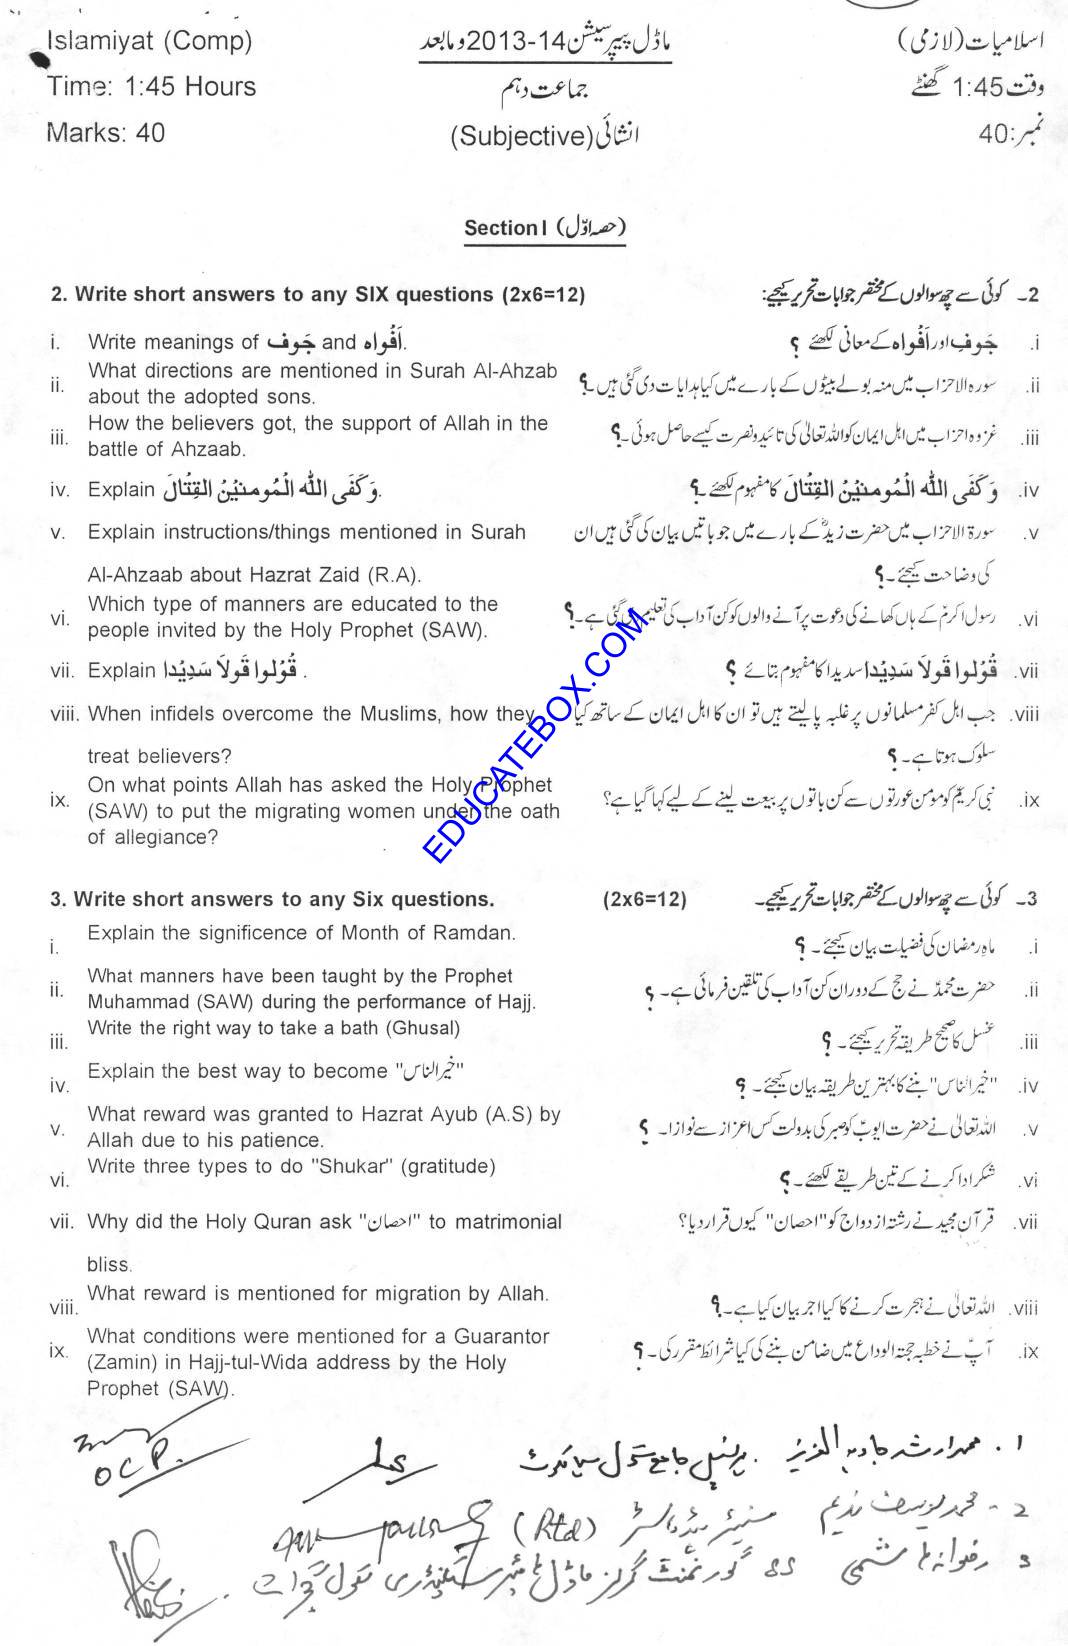 model-paper-10th-islamiat-subjective-page1-2013-14